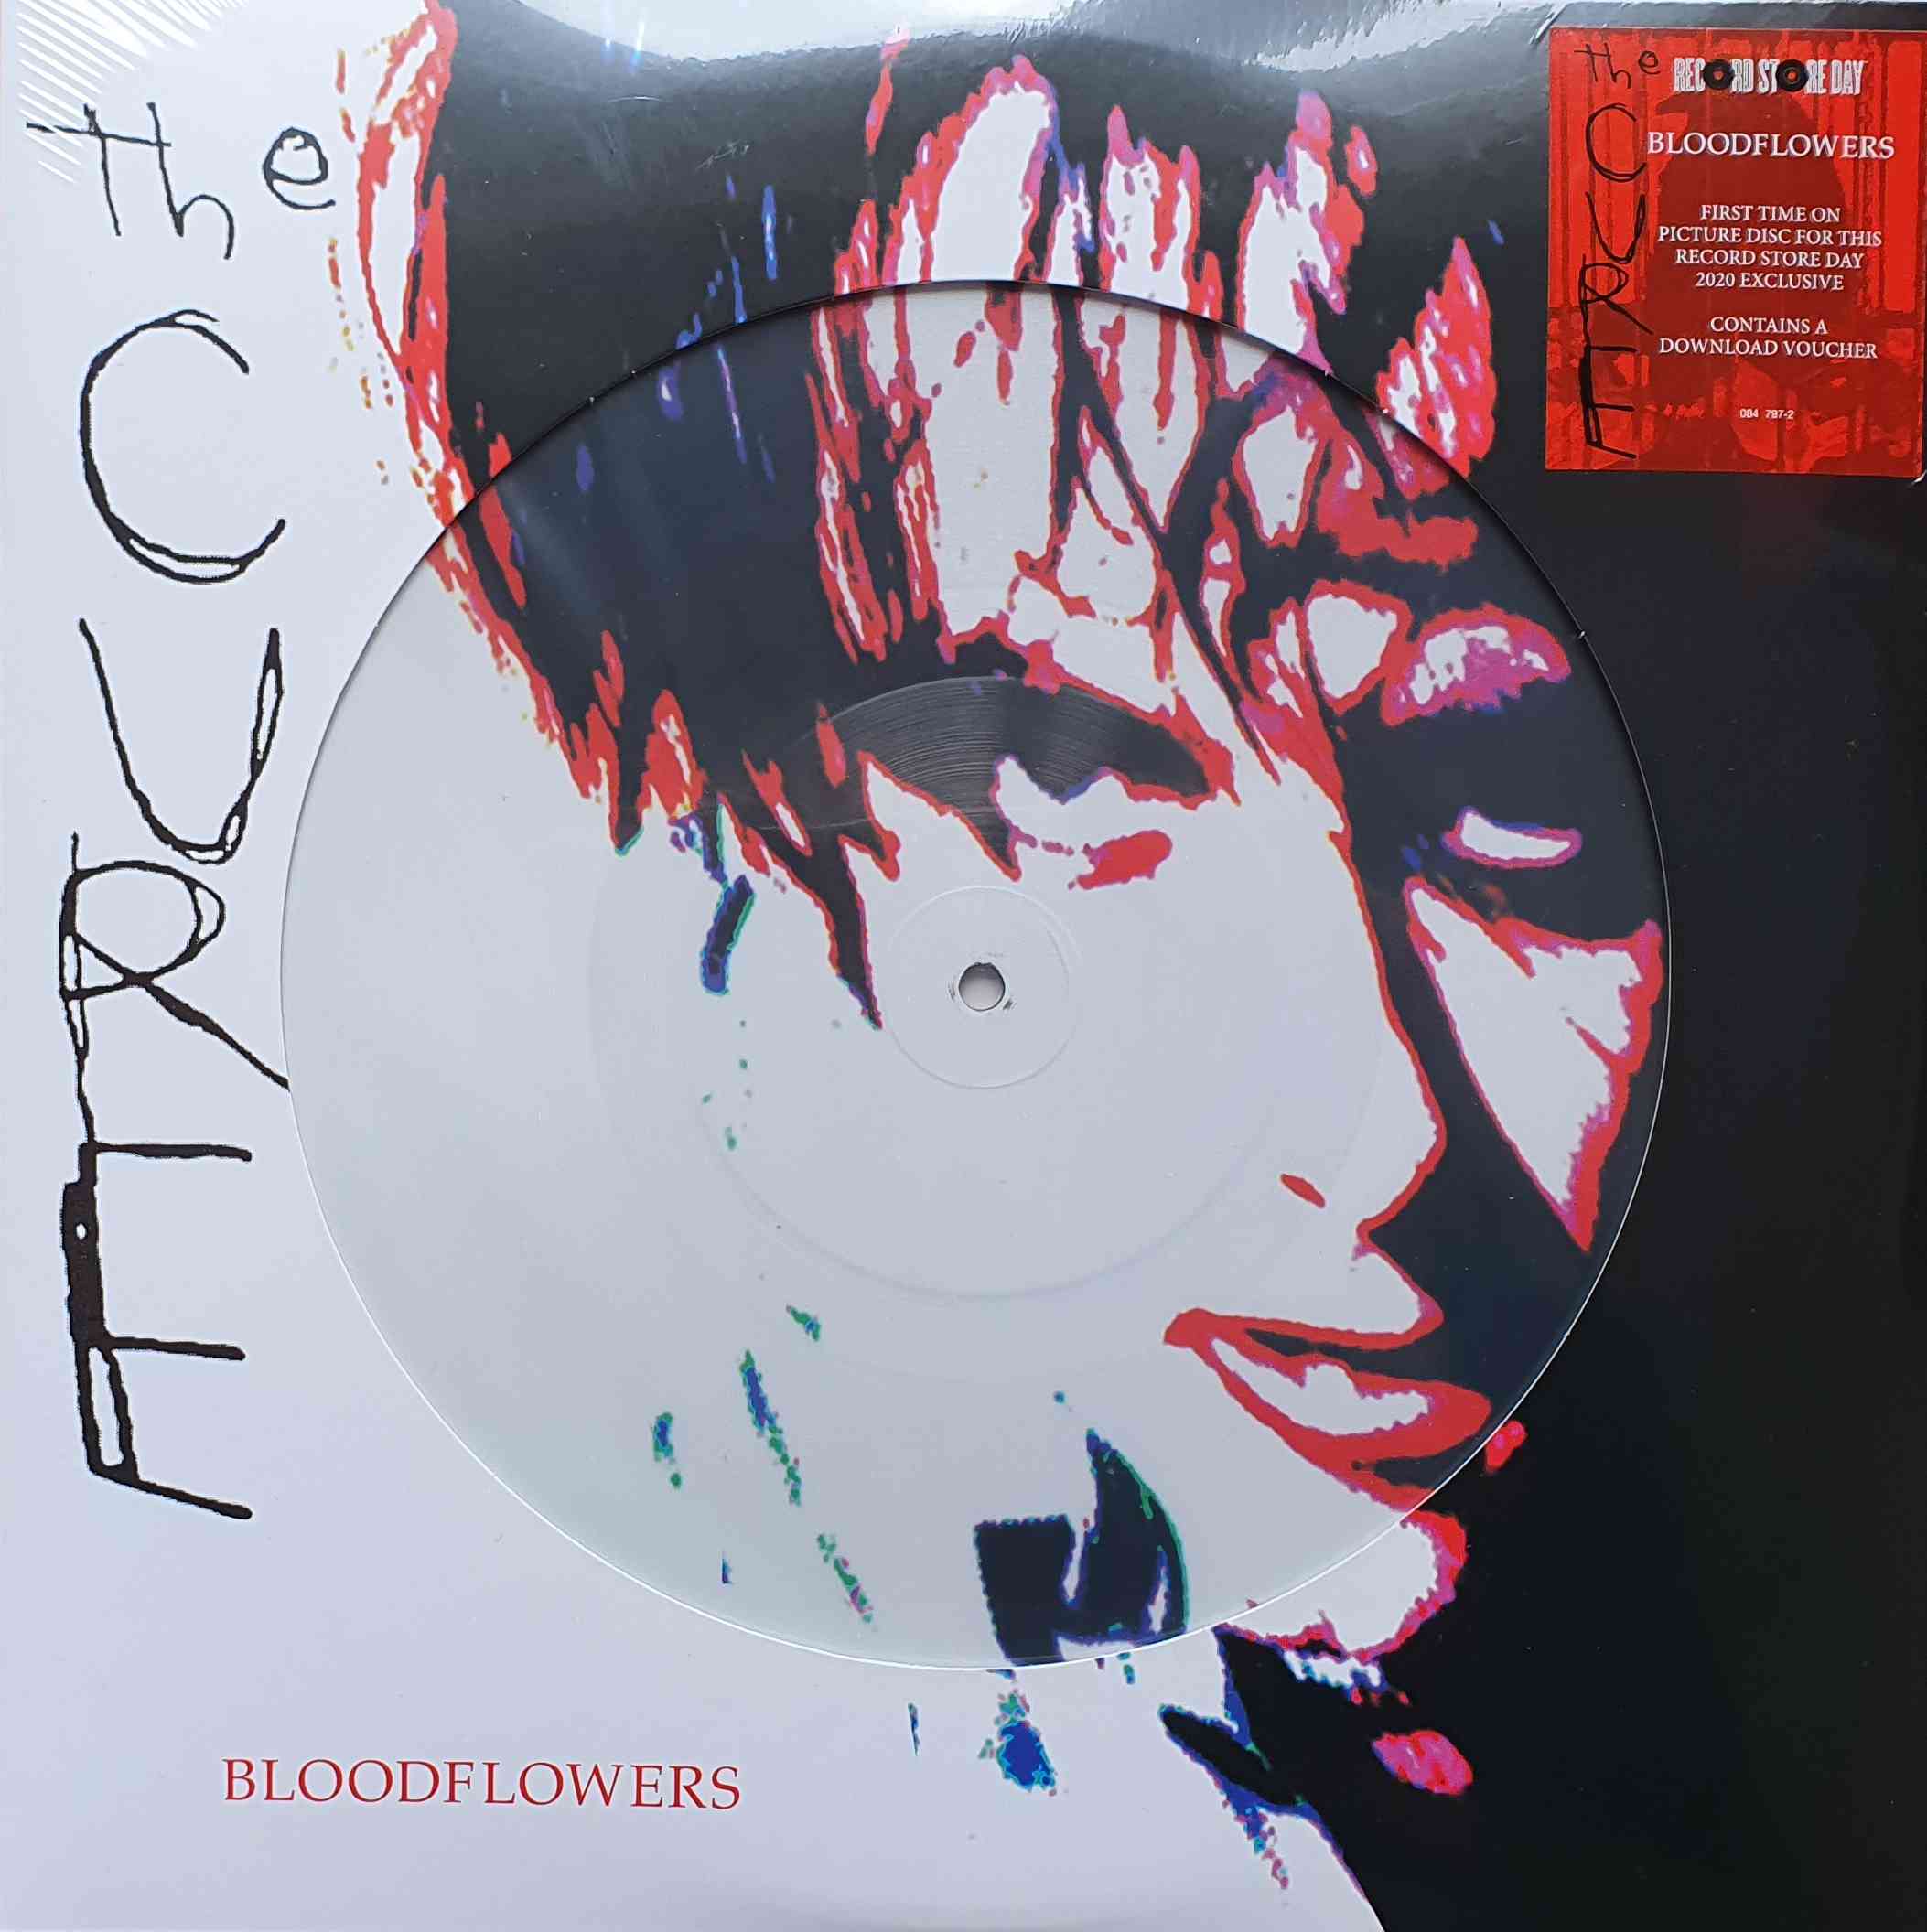 Picture of Bloodflowers - Record Store Day 2020 by artist The Cure 